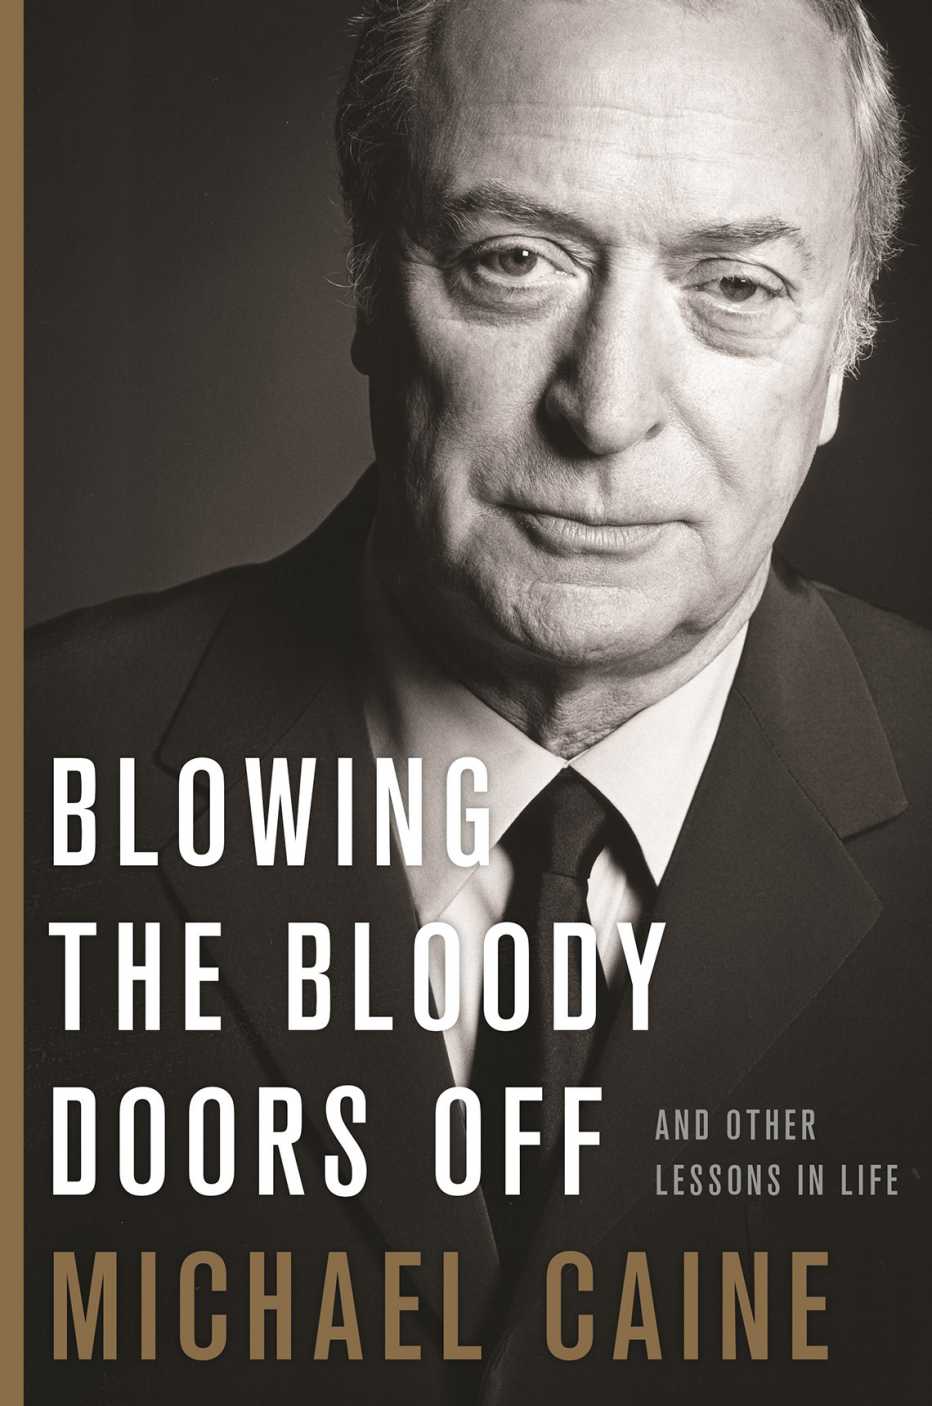 Book cover: Blowing the Bloody Doors Off, and Other Lessons in Life, Michael Caine